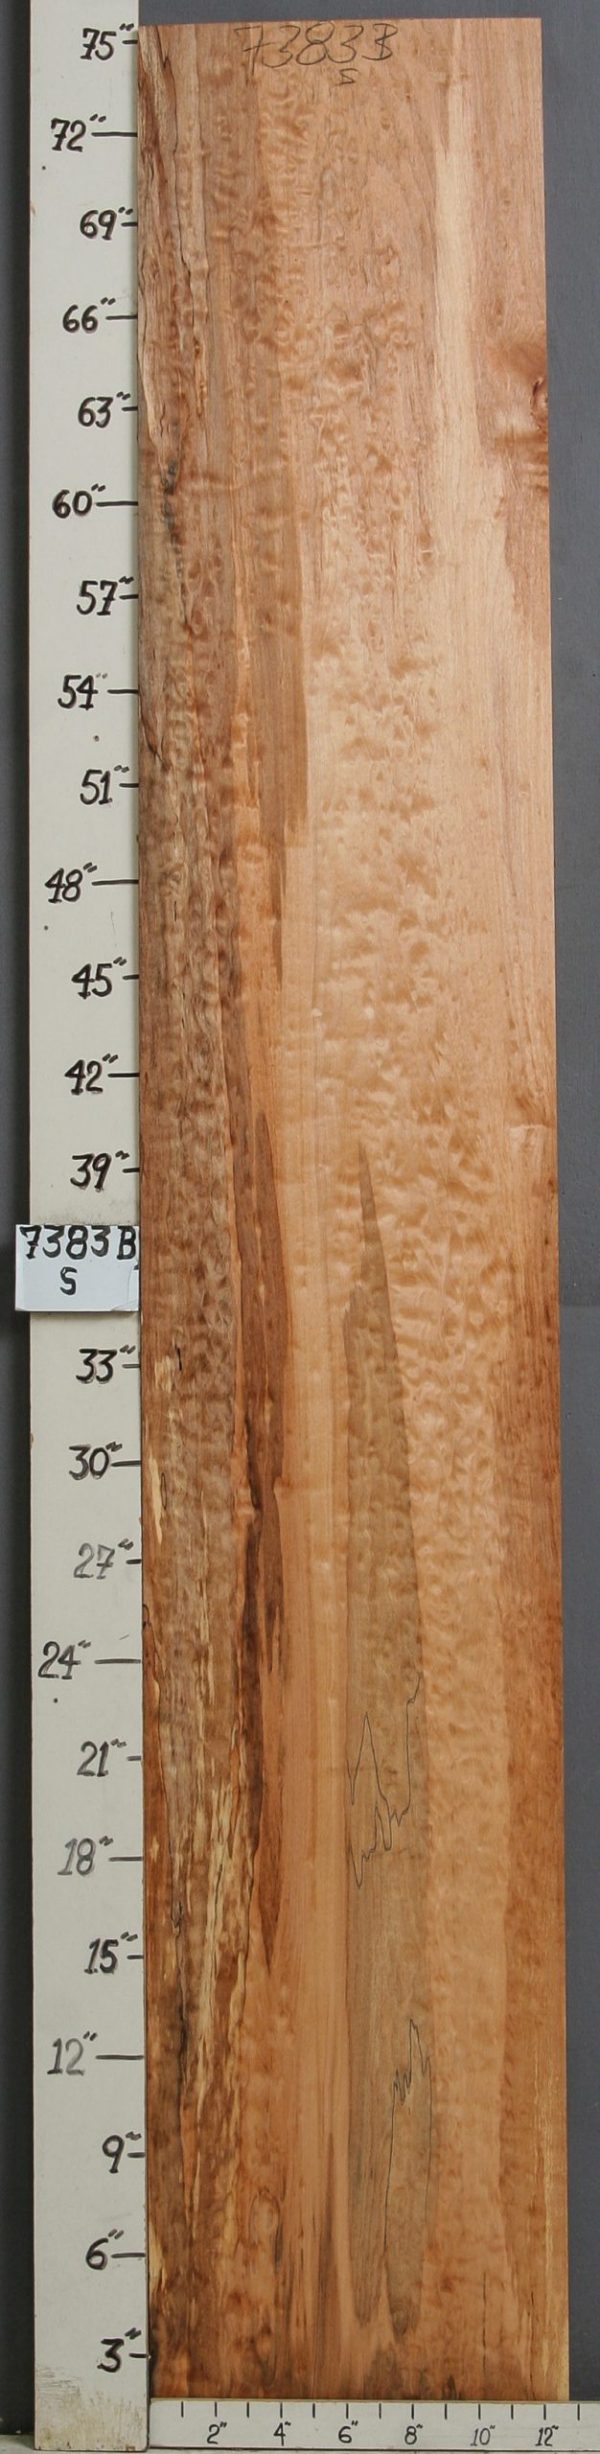 spalted quilted maple lumber